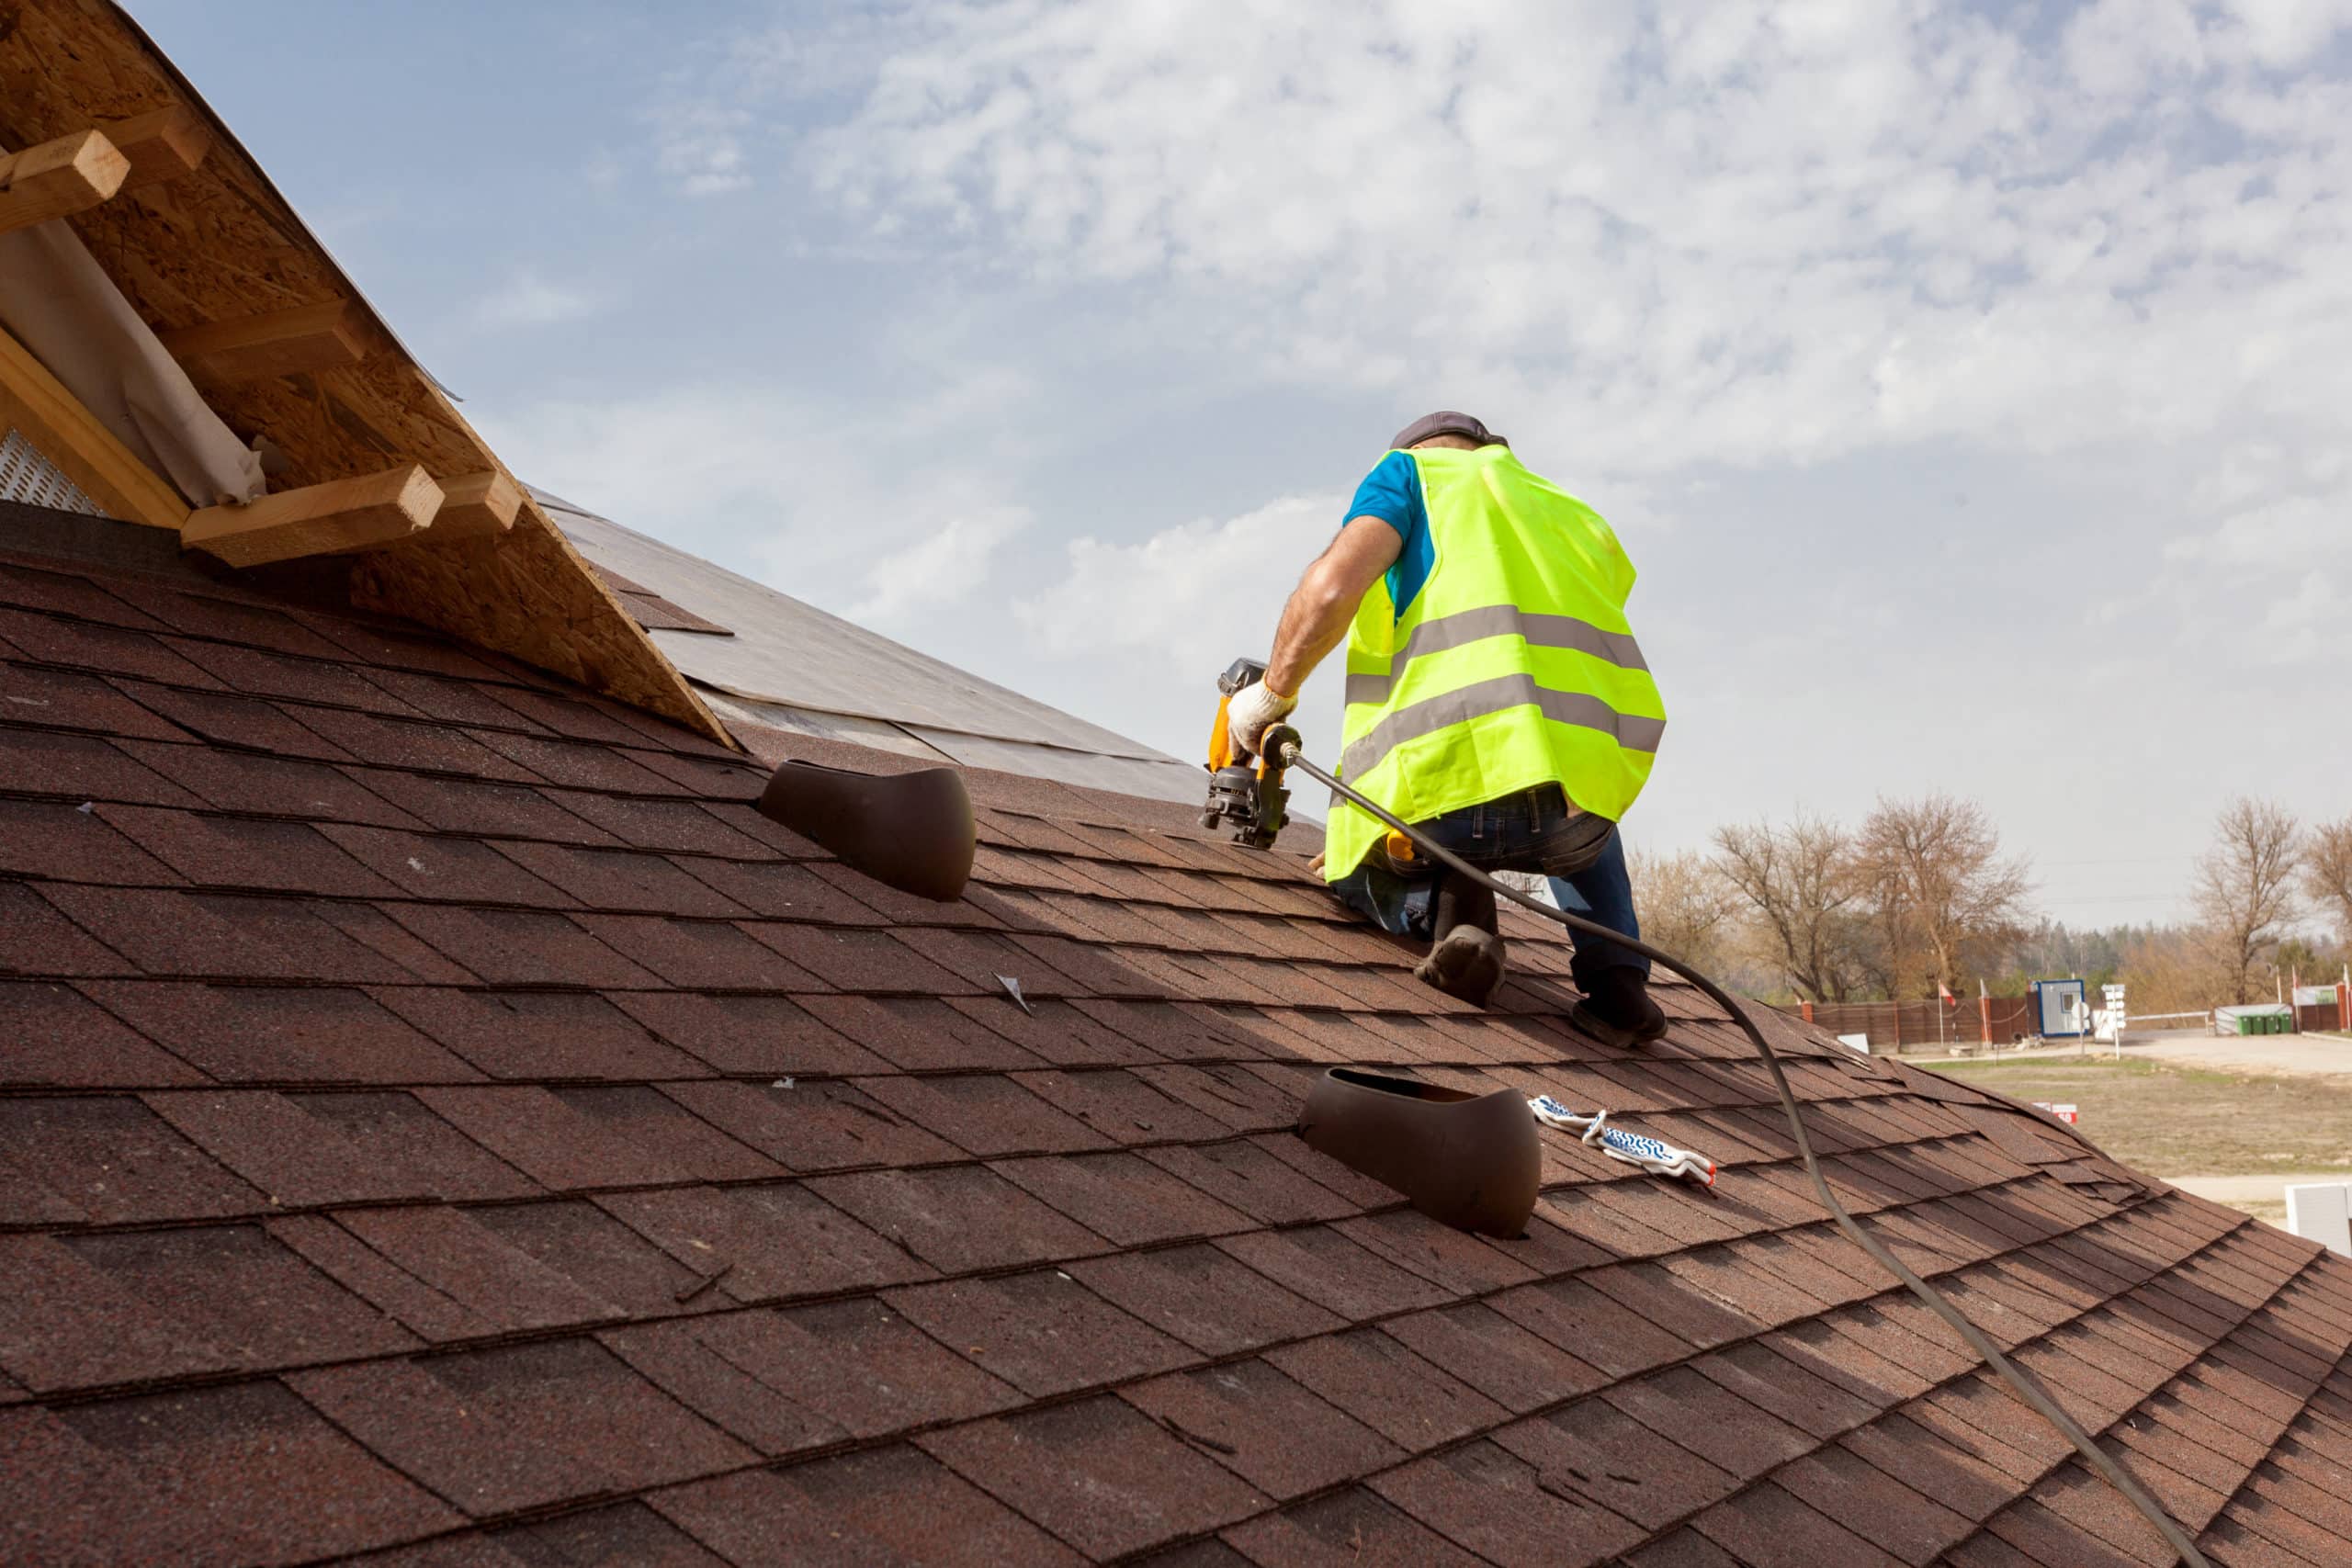 A&e Roofing Contractor Queens Ny